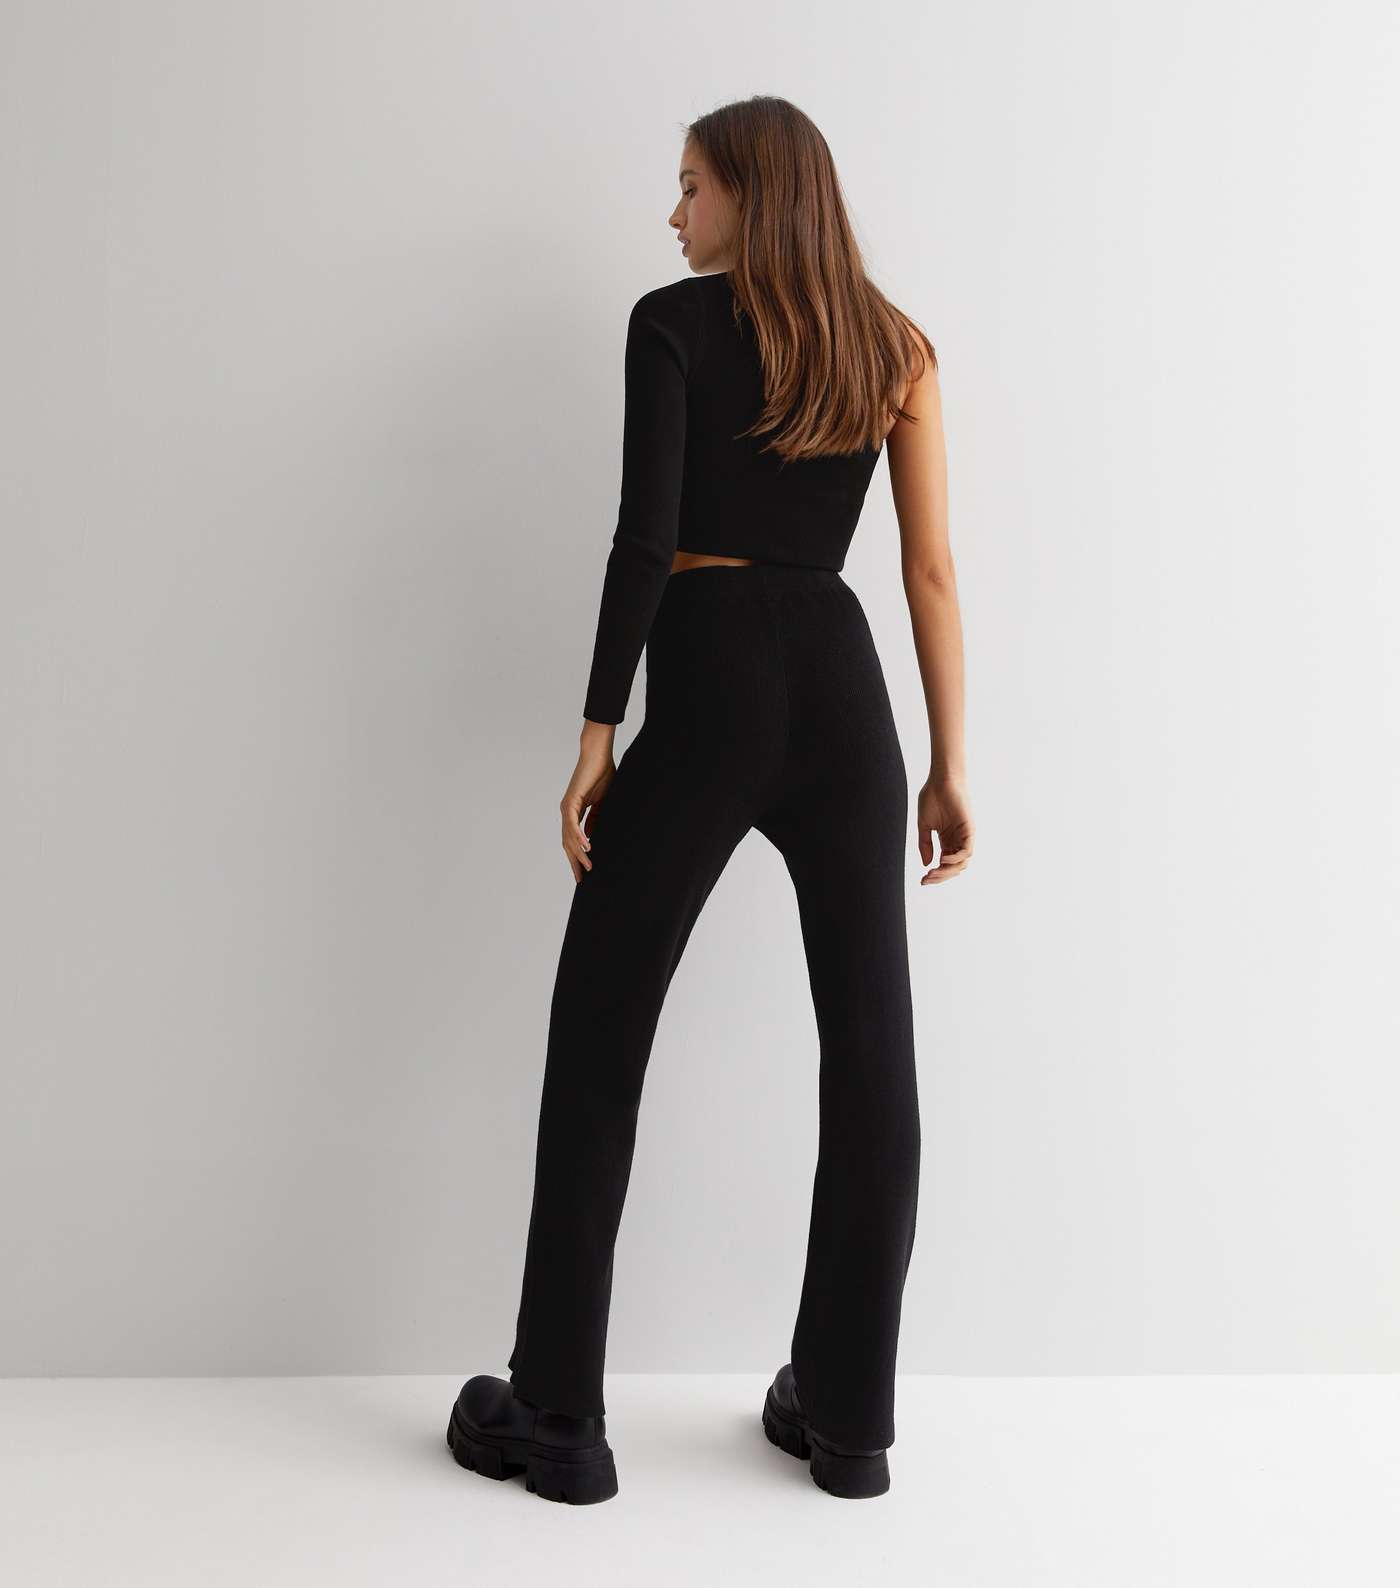 Gini London Black Ribbed Knit High Waist Trousers Image 4